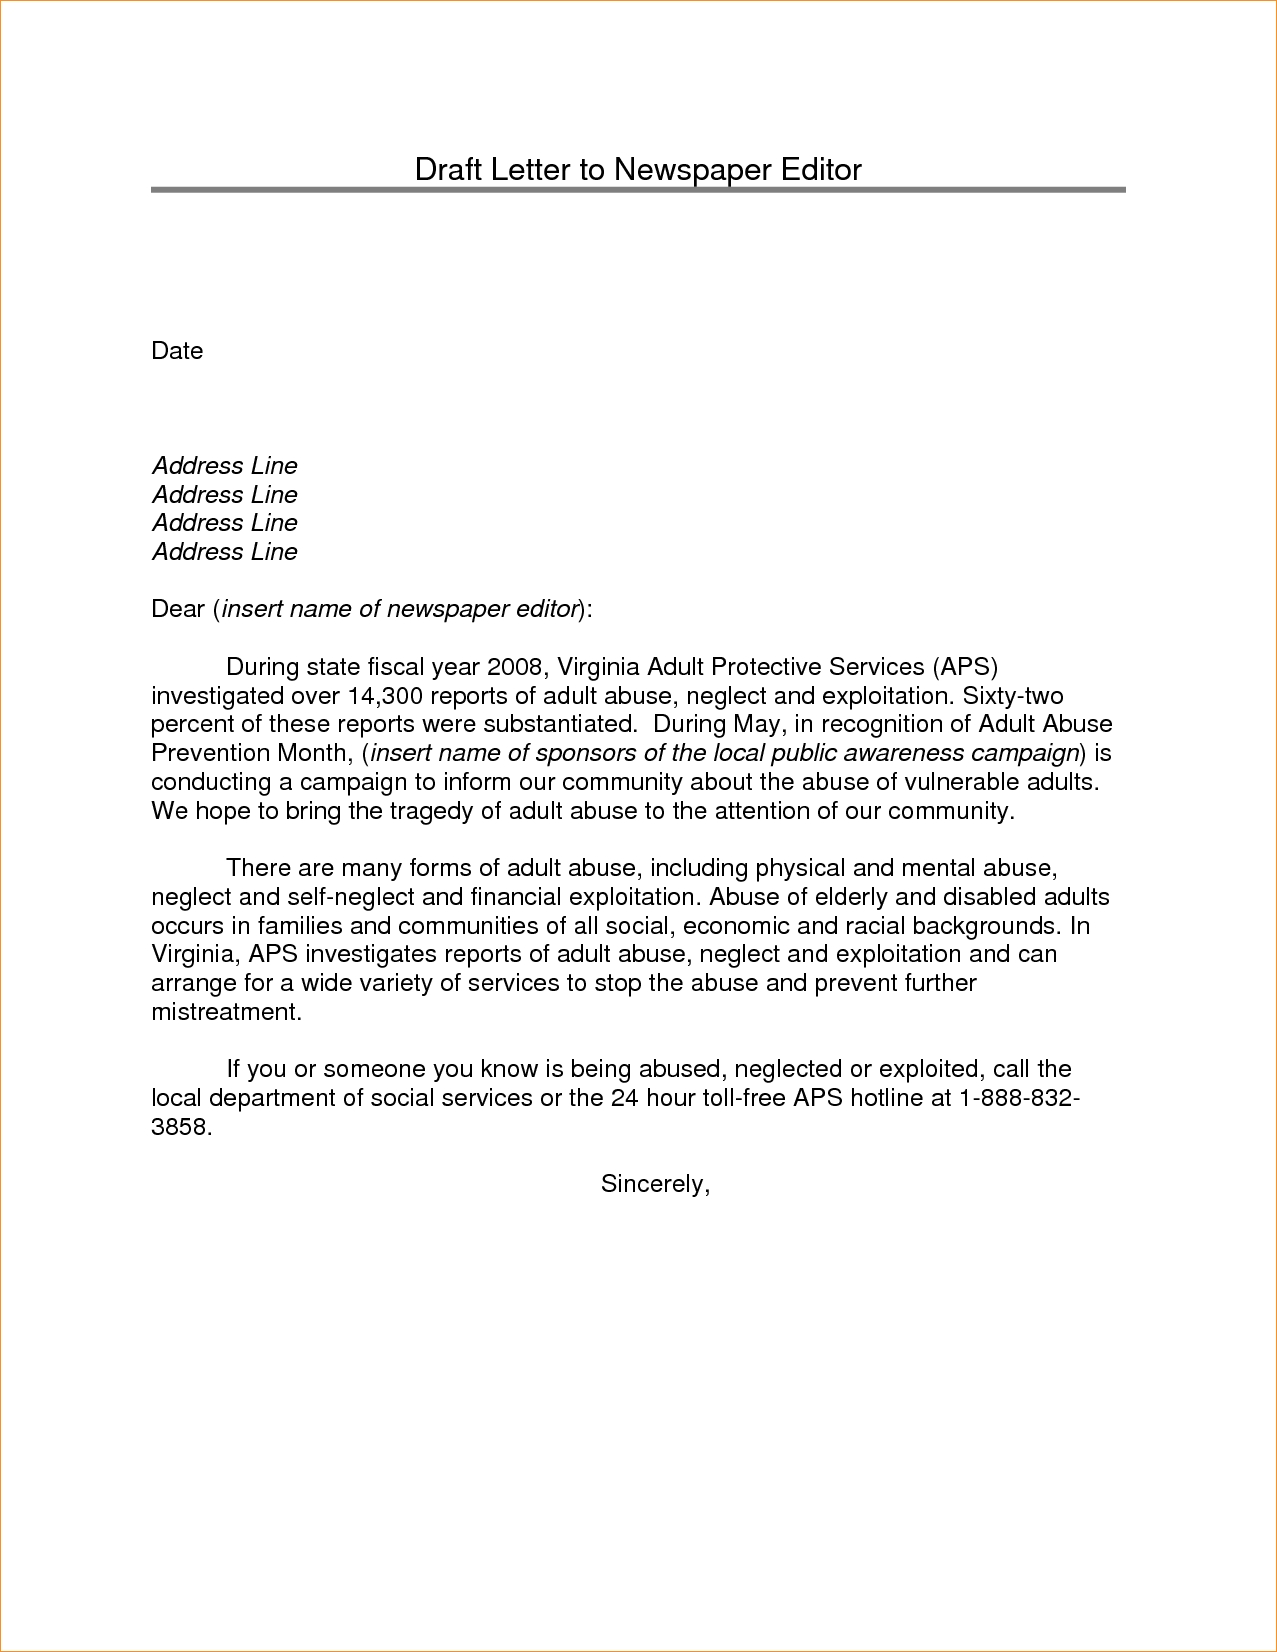 10 Elegant Letter To The Editor Ideas ideas of a formal letter to the editor sample business proposal 2022